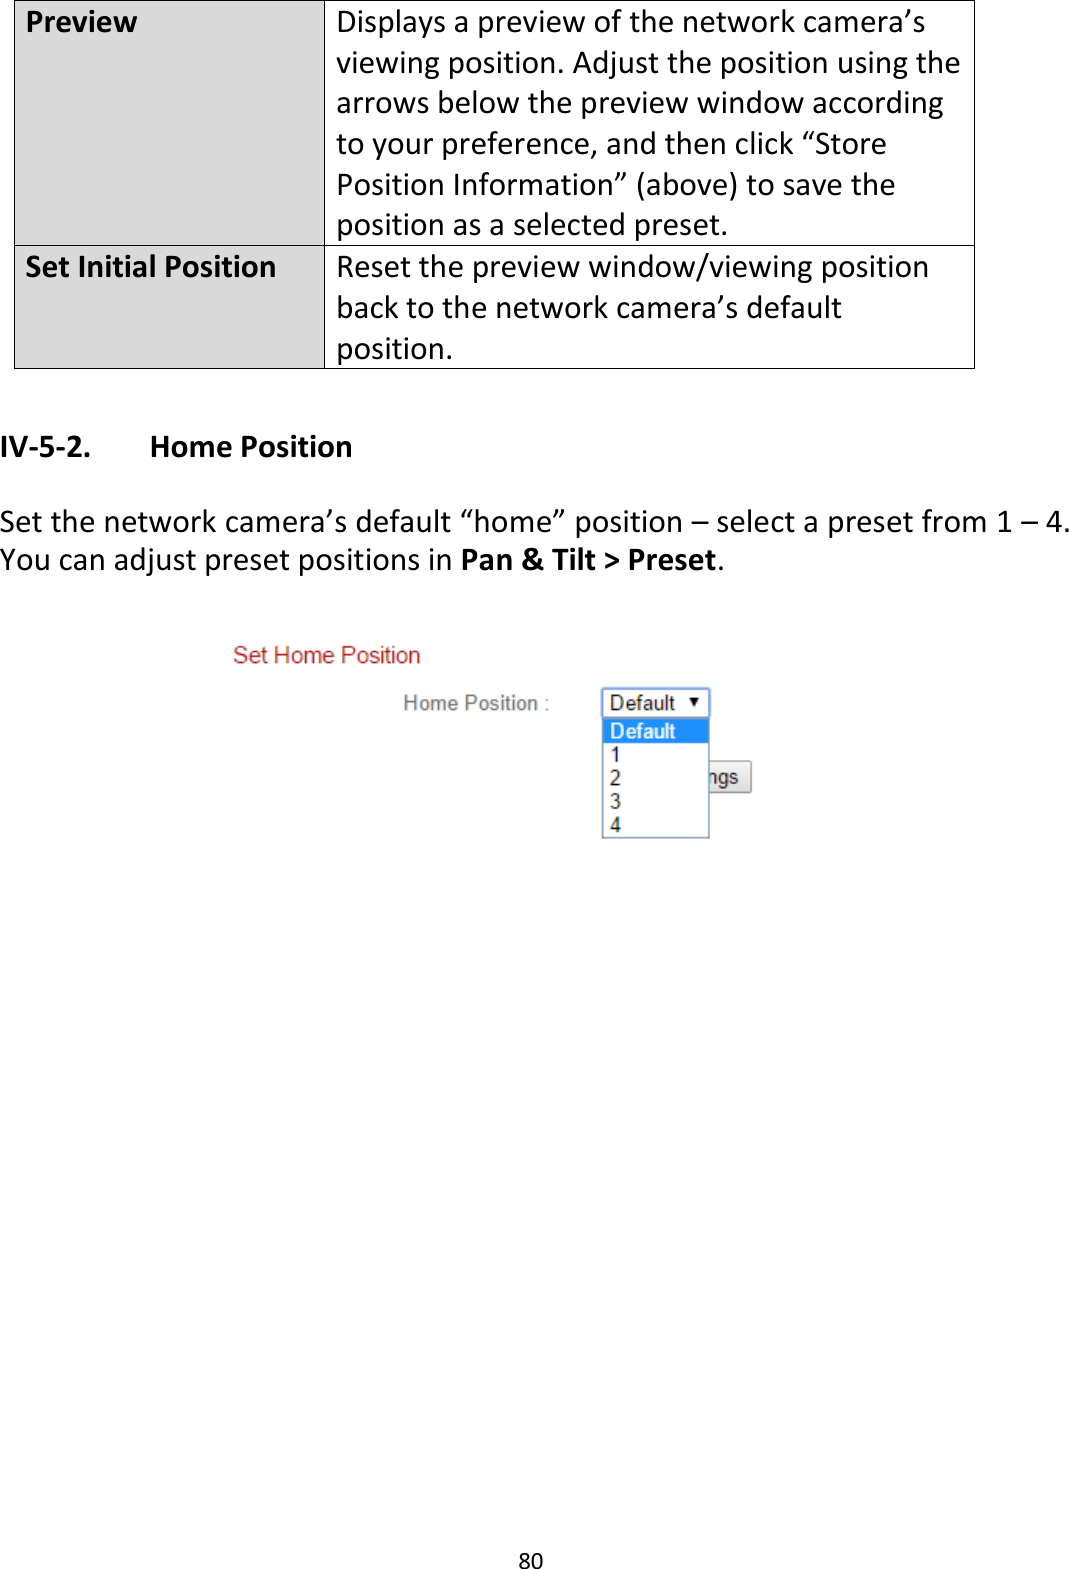 80  Preview Displays a preview of the network camera’s viewing position. Adjust the position using the arrows below the preview window according to your preference, and then click “Store Position Information” (above) to save the position as a selected preset. Set Initial Position Reset the preview window/viewing position back to the network camera’s default position.  IV-5-2.   Home Position  Set the network camera’s default “home” position – select a preset from 1 – 4. You can adjust preset positions in Pan &amp; Tilt &gt; Preset.   